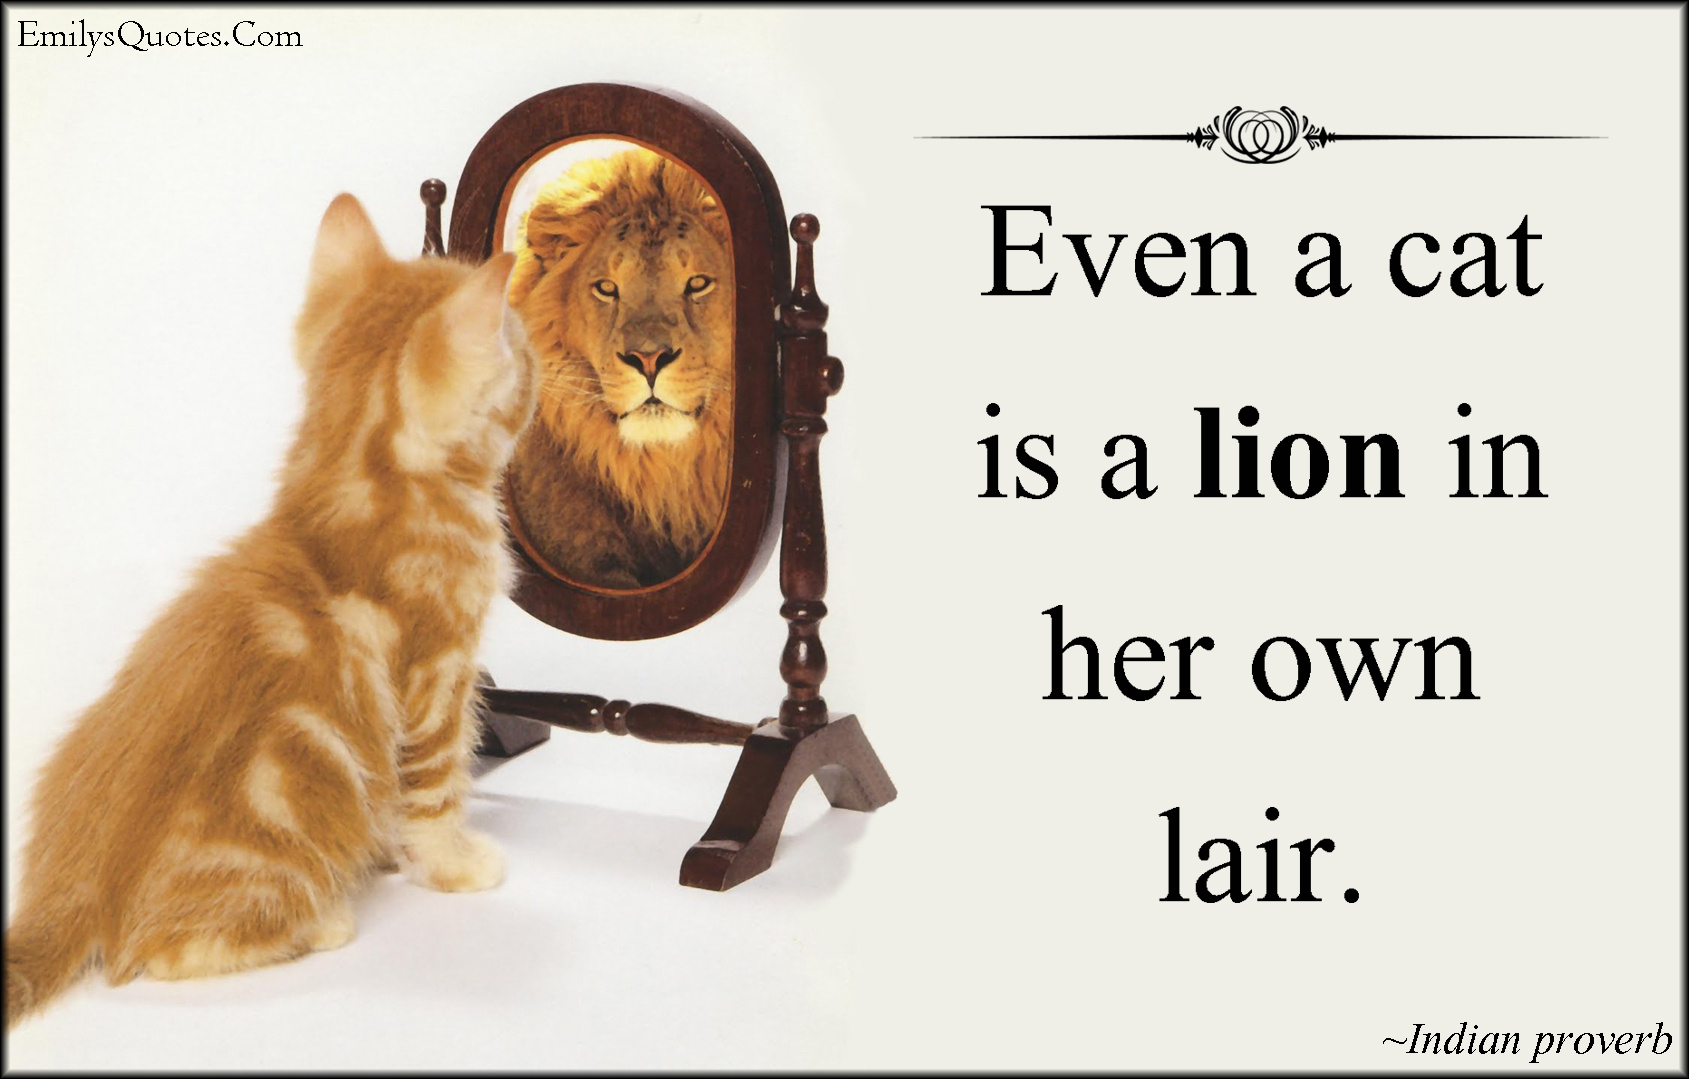 Even a cat is a lion in her own lair